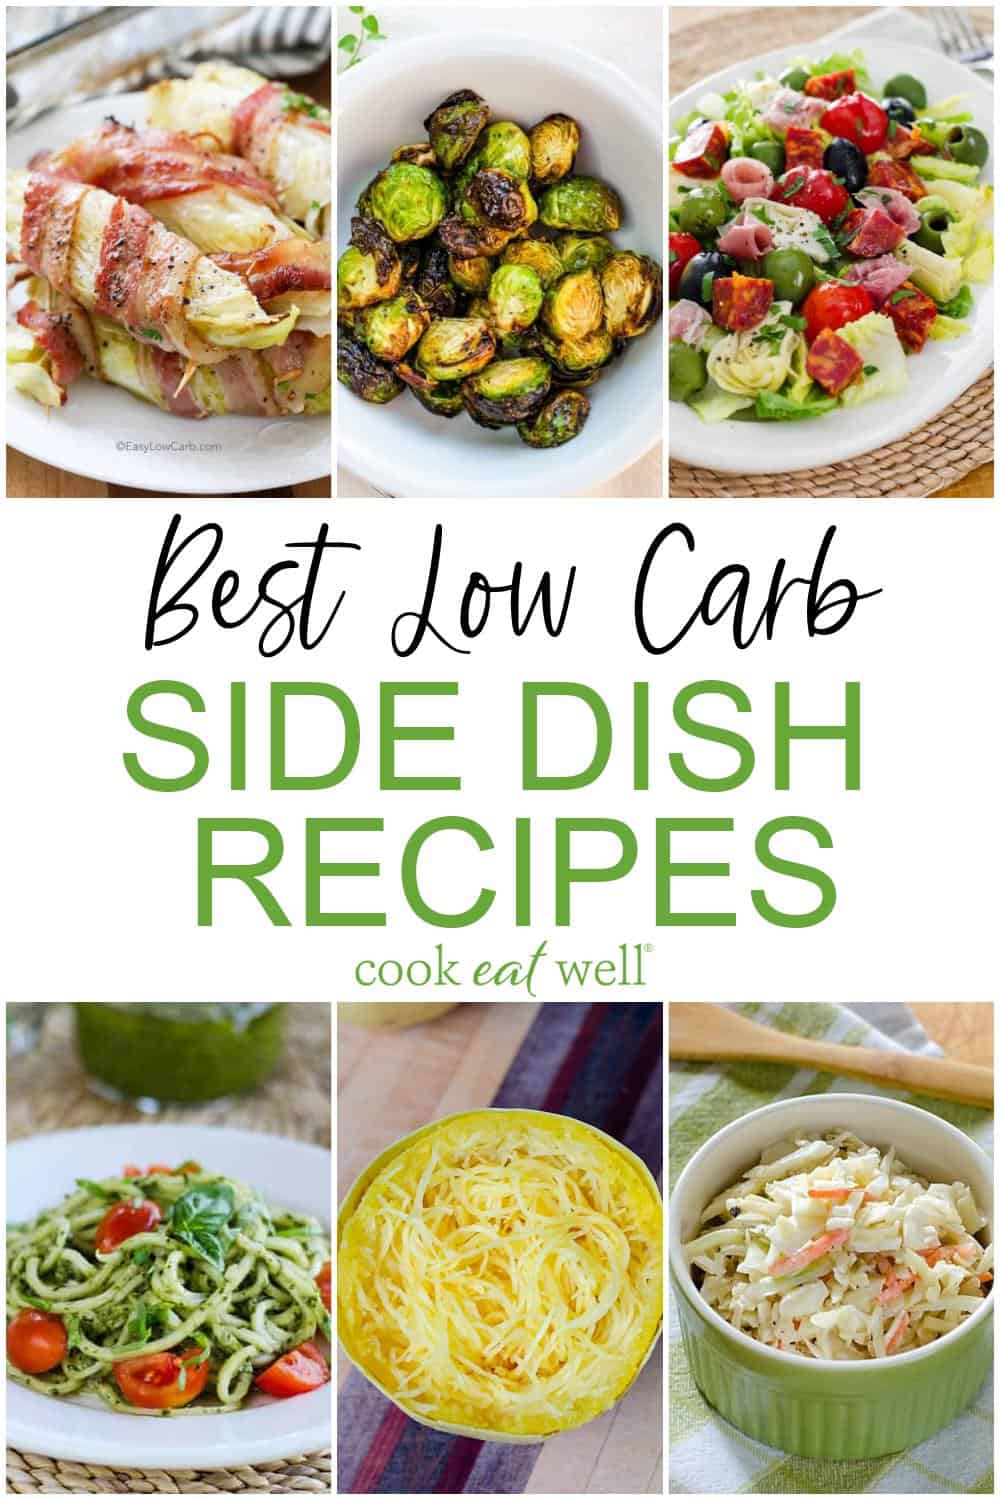 Best low carb side dish recipes